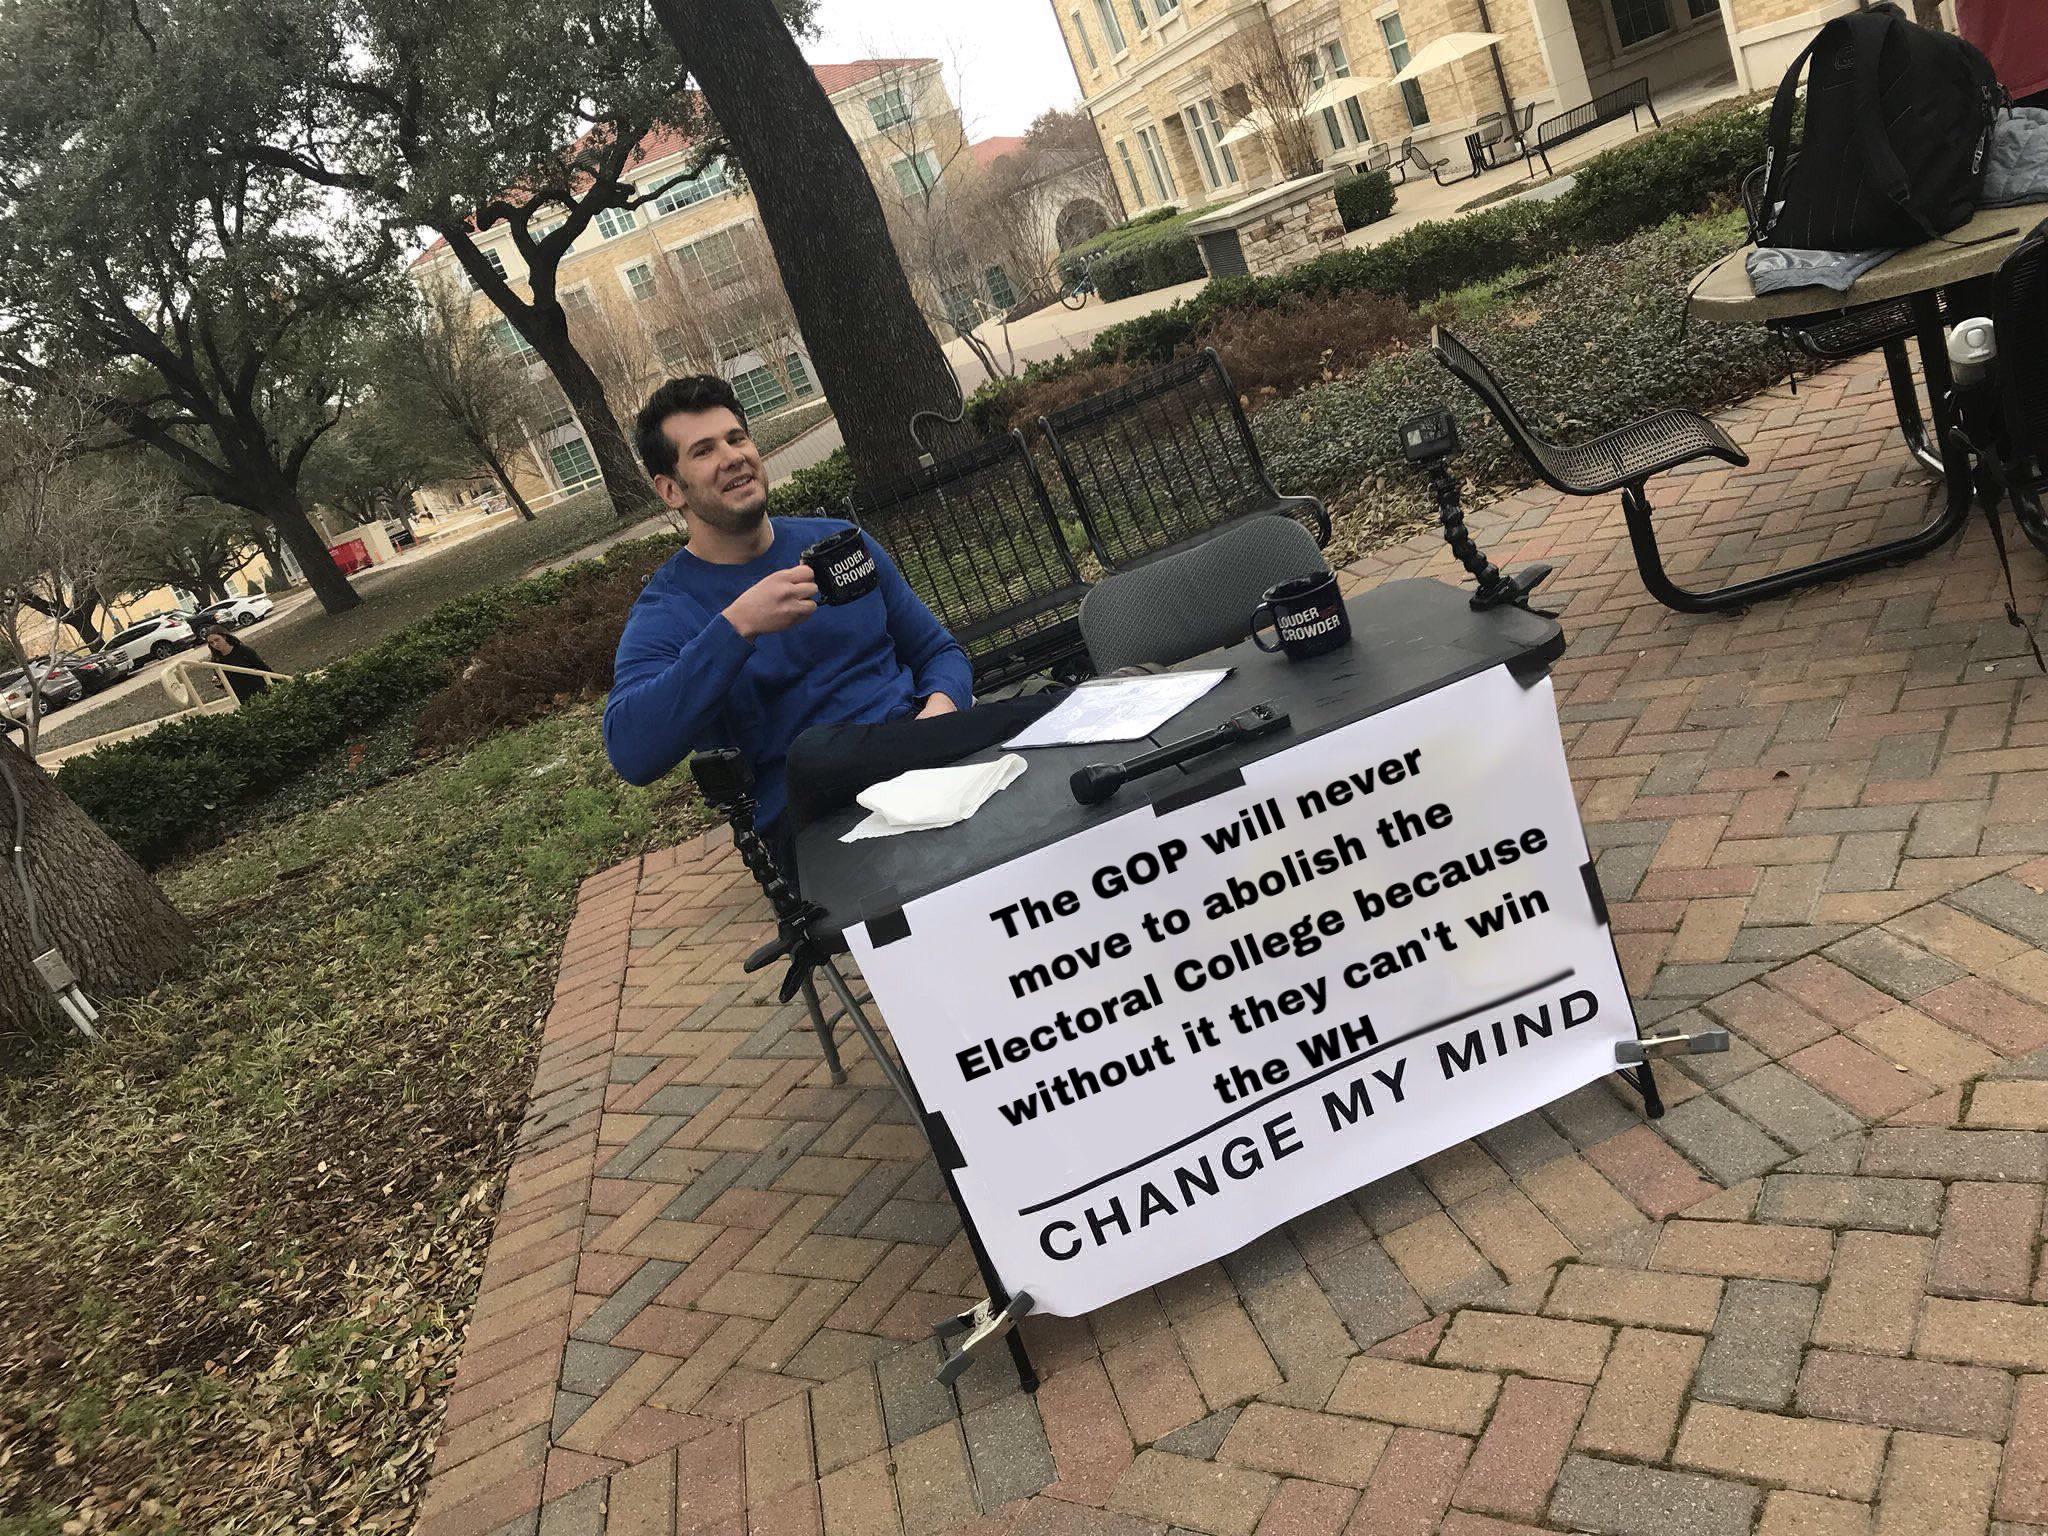 crowder change my mind - The Gop will never move to abolish the Electoral College because without it they can't win the Wh Change My Mind